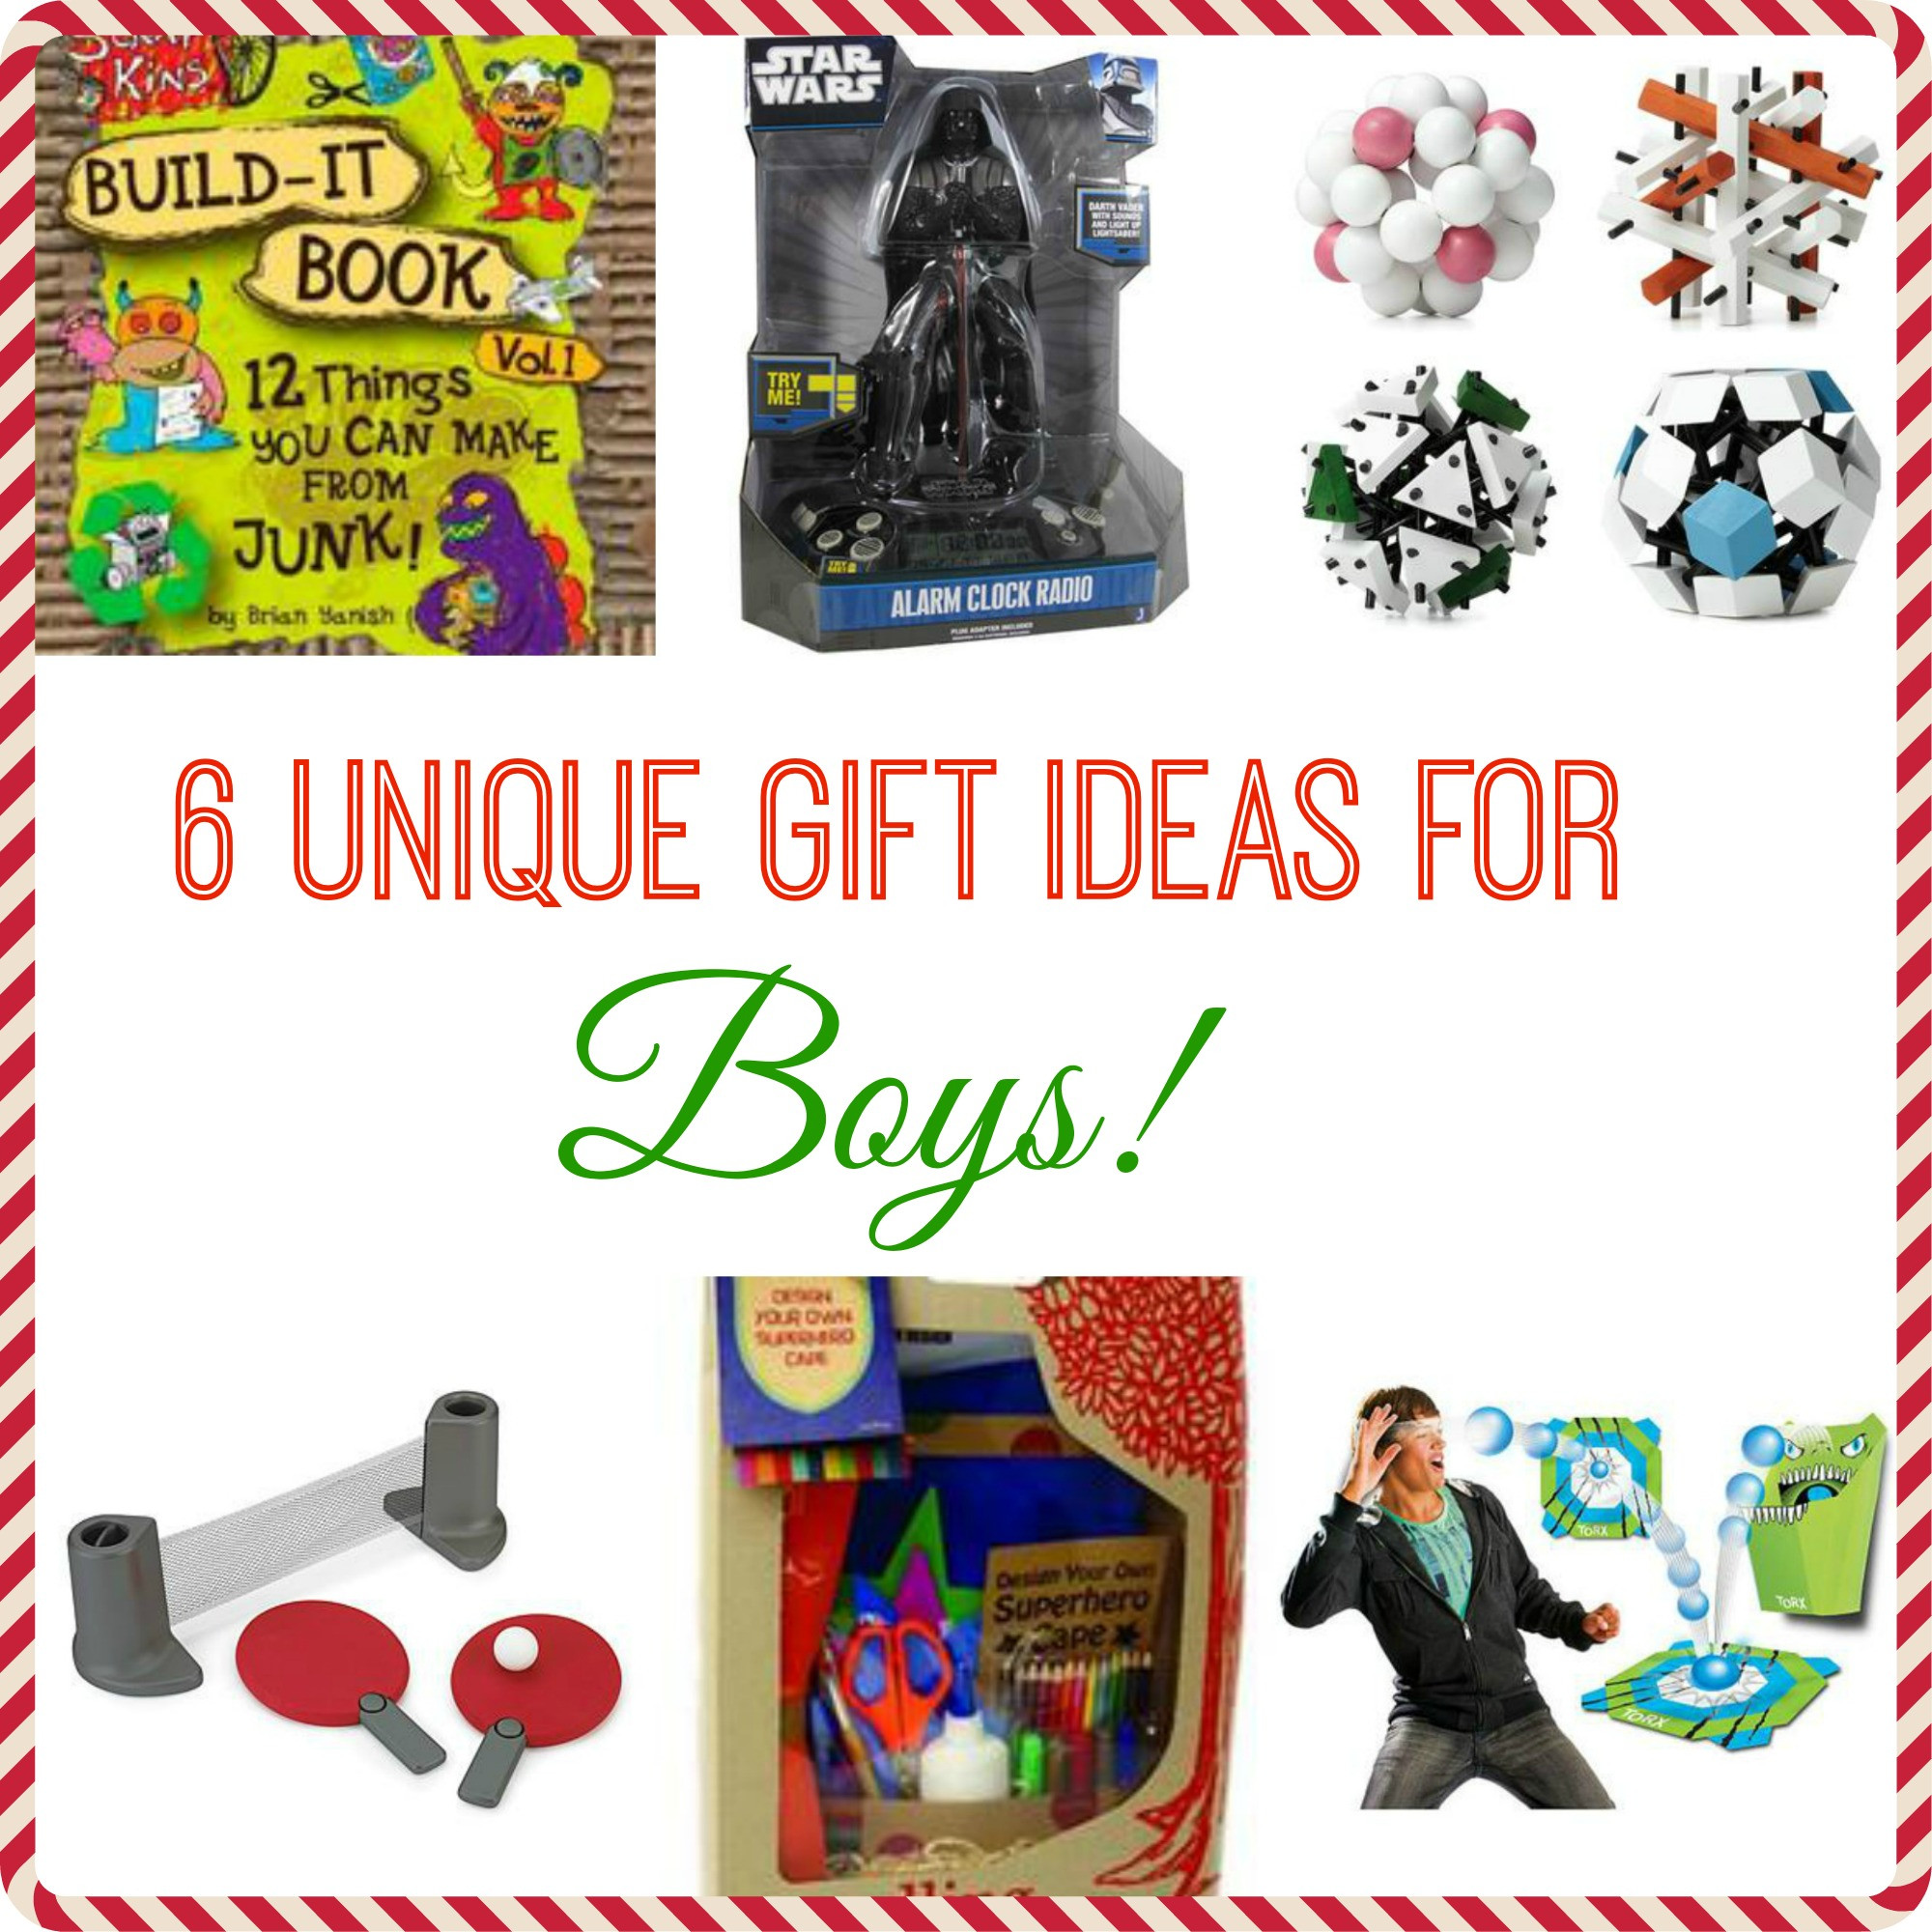 Cool Gift Ideas For Boys
 6 Unique Gift Ideas for Boys